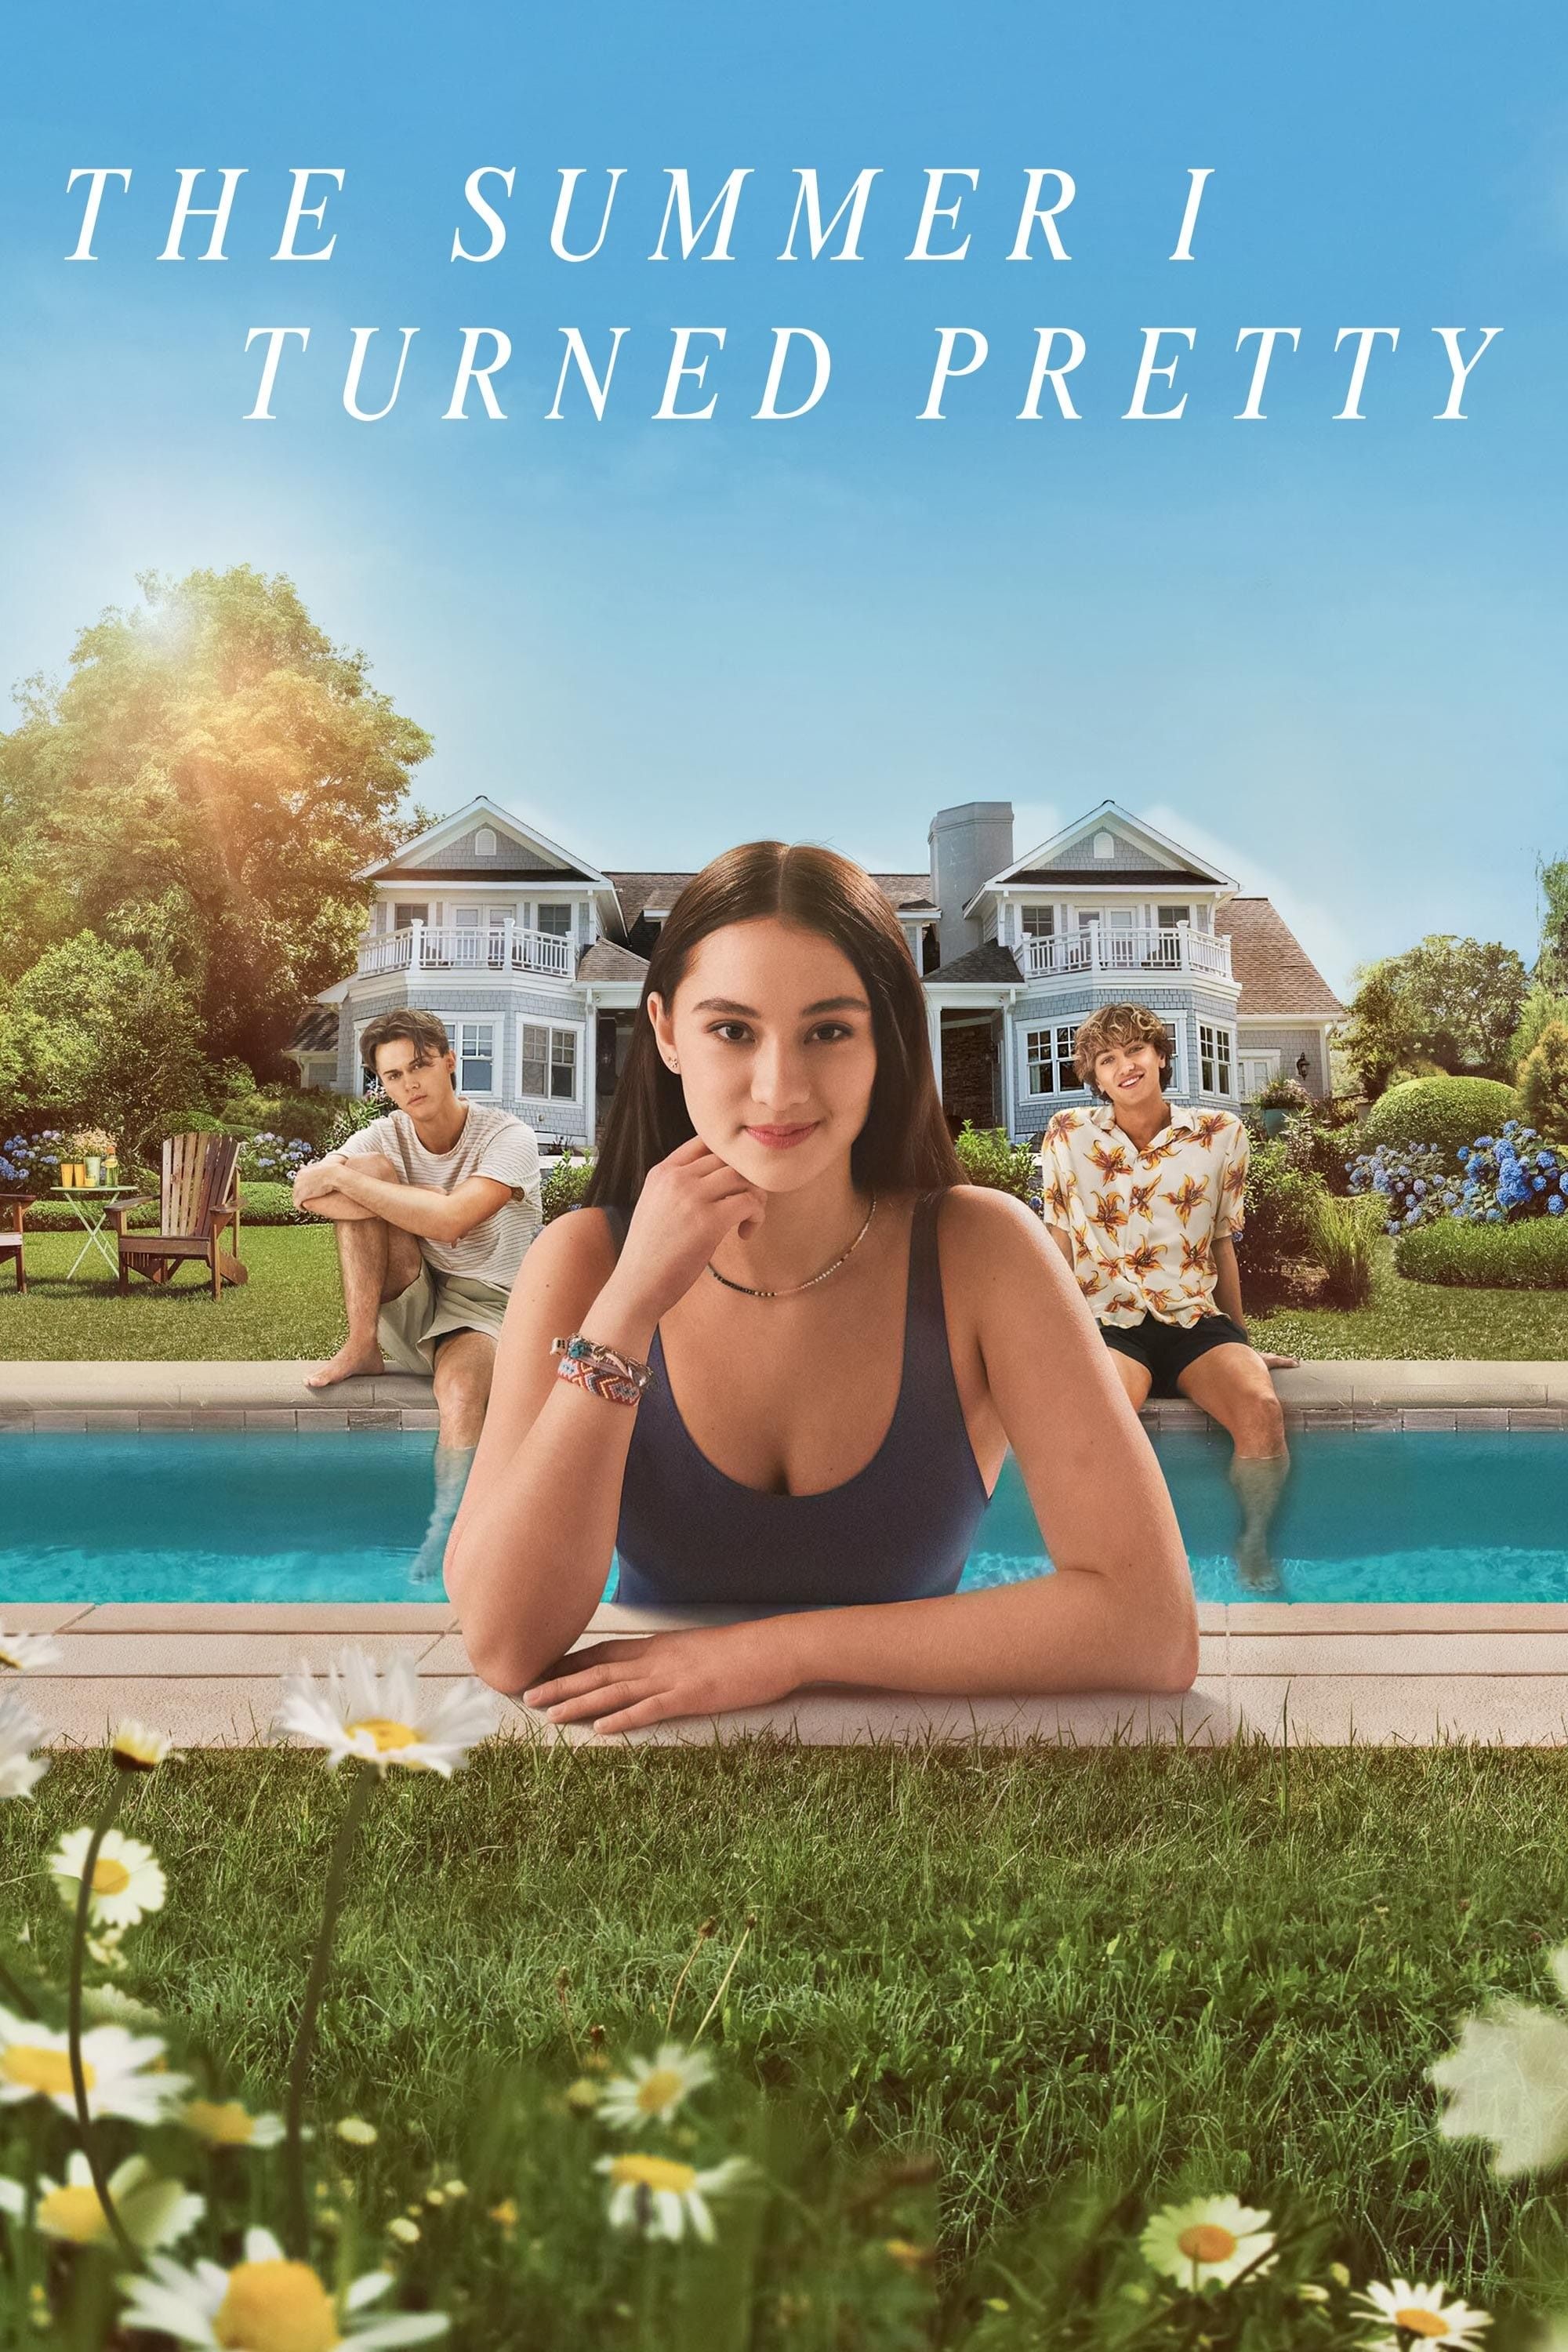 The Summer I Turned Pretty (2022) TV Show Information & Trailers